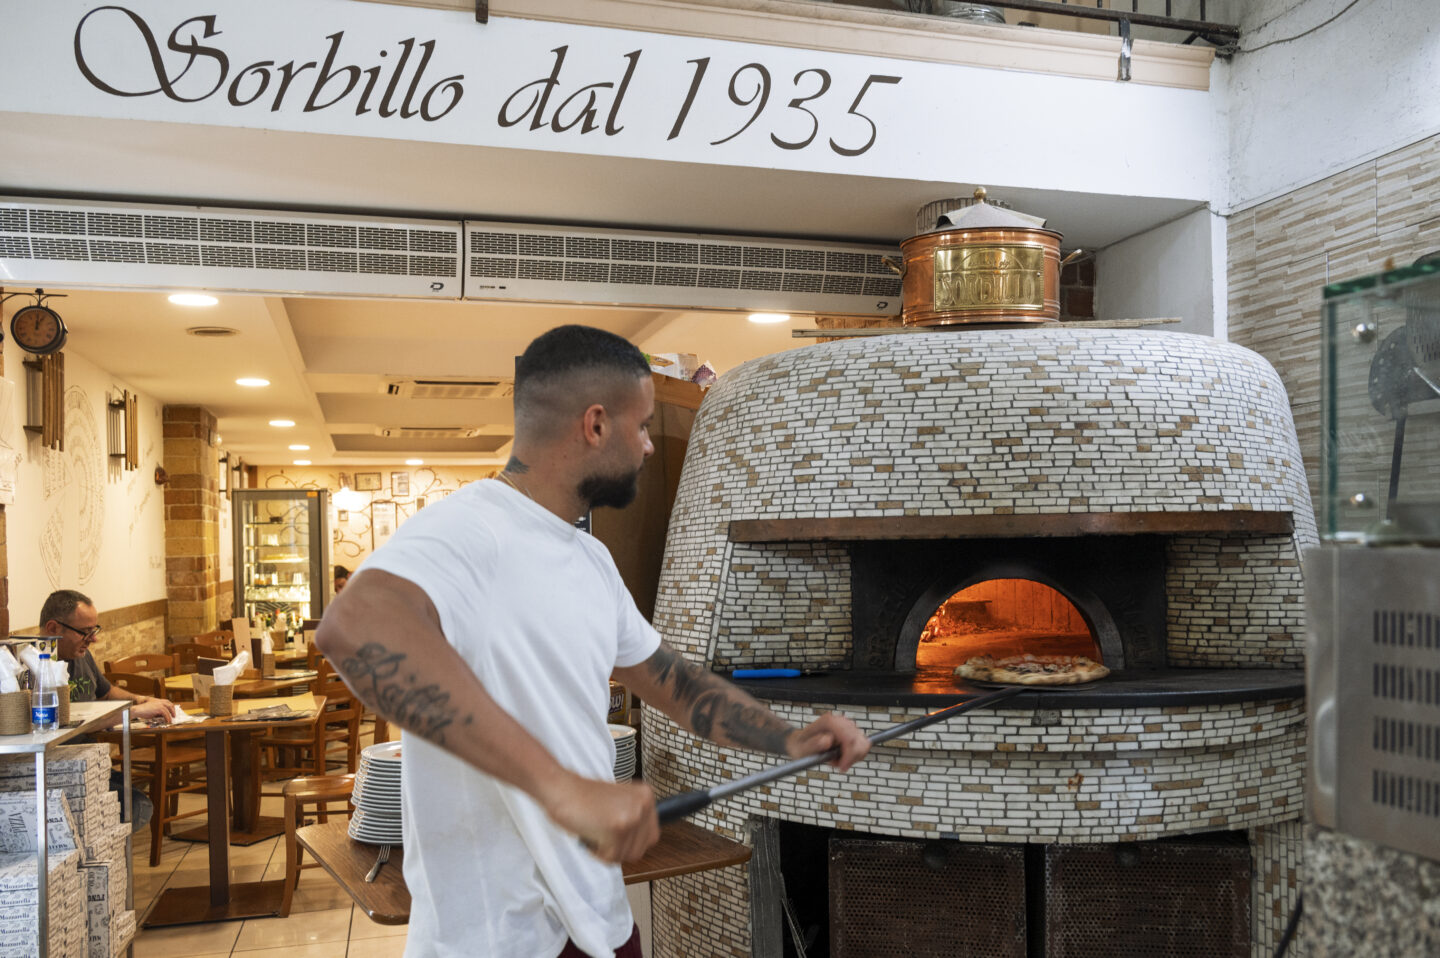 Top 10 Things To Do In Naples, Italy - Authentic Neapolitan Pizza